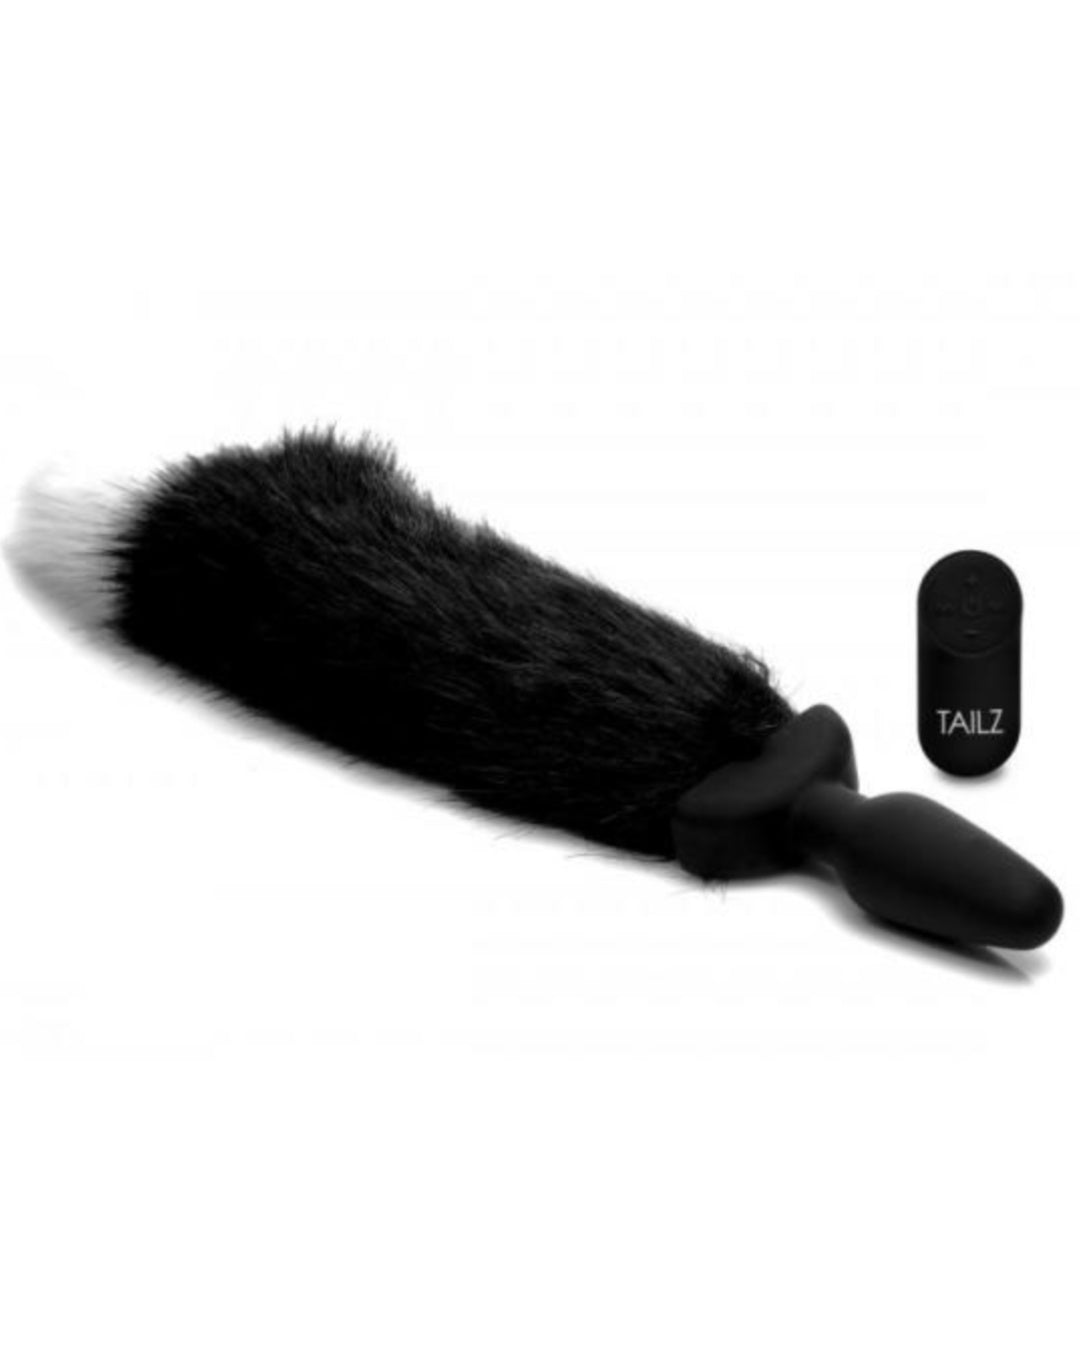 Tailz Waggerz Moving and Vibrating Fox Tail and Ears tail and remote